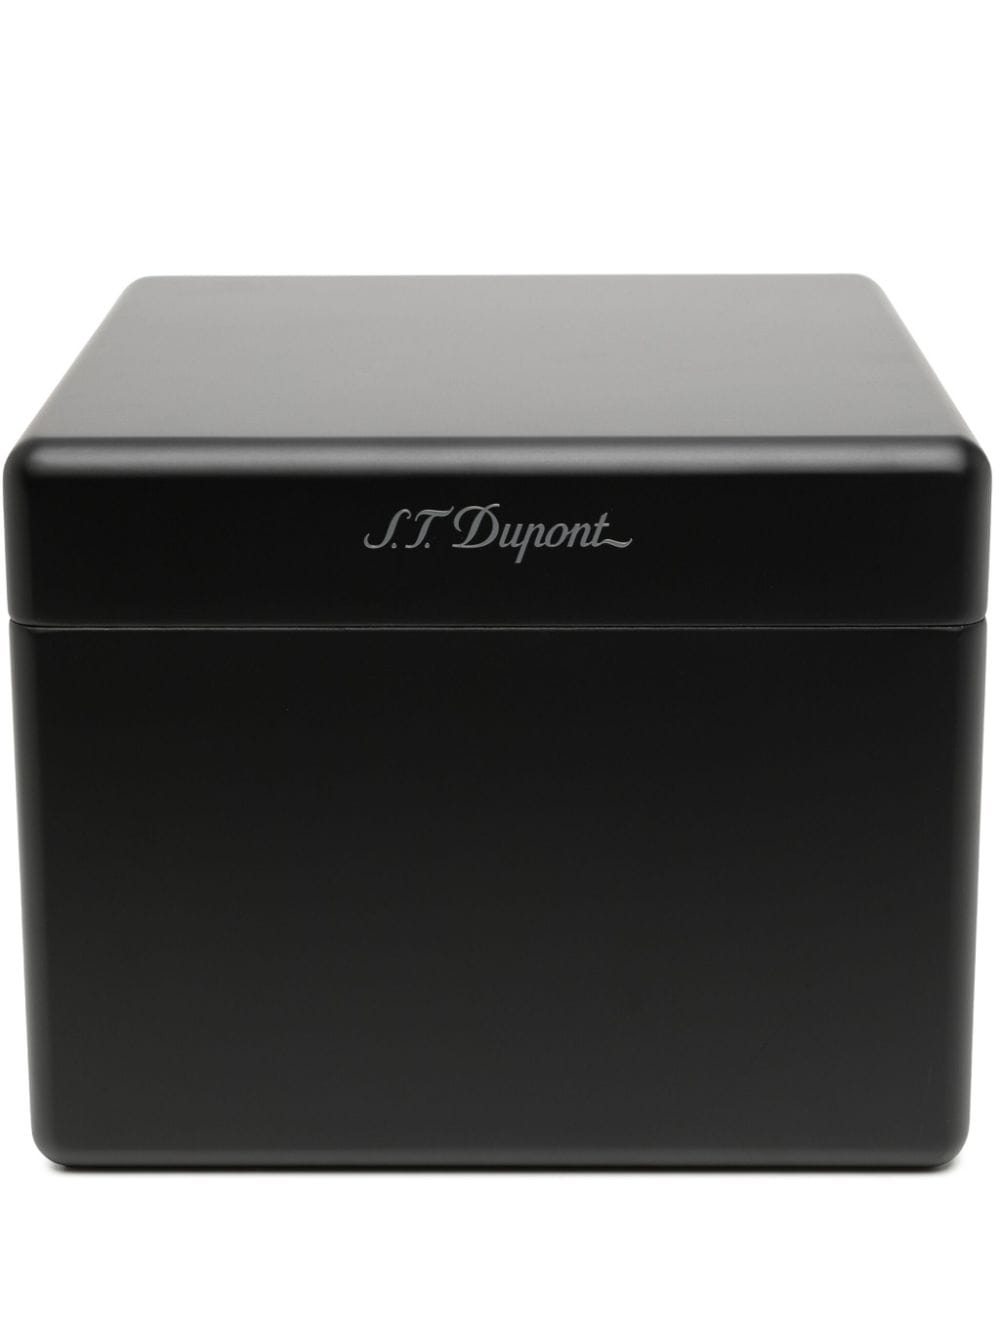 S.T. Dupont cubic-body cigar humidor - Black von S.T. Dupont